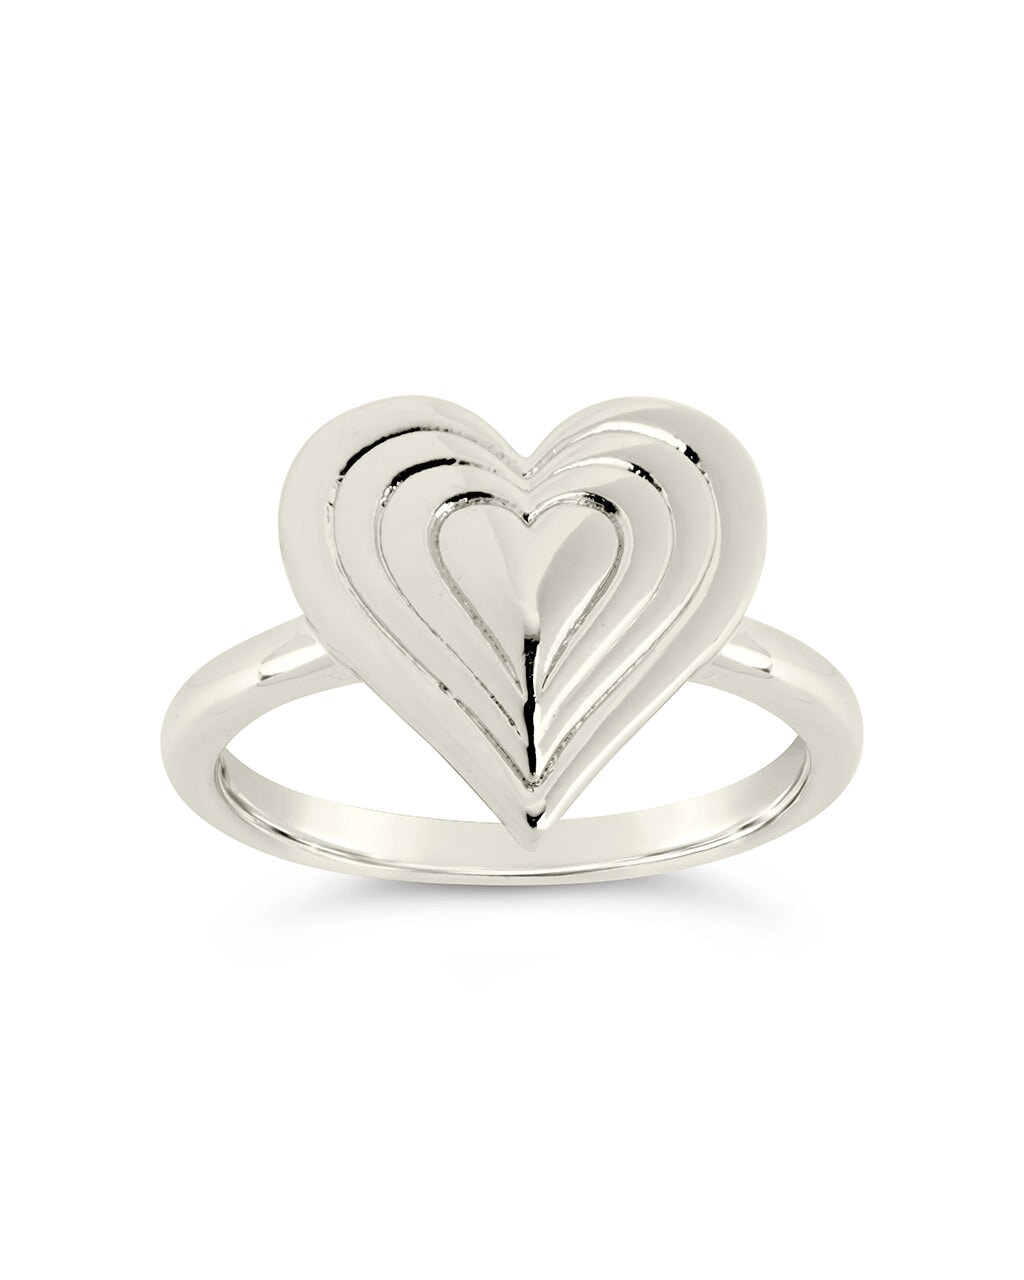 5 Sterling Silver Heart Jump Rings in 2 Sizes Open or Soldered Closed  Shiny, Antique or Black Finish 